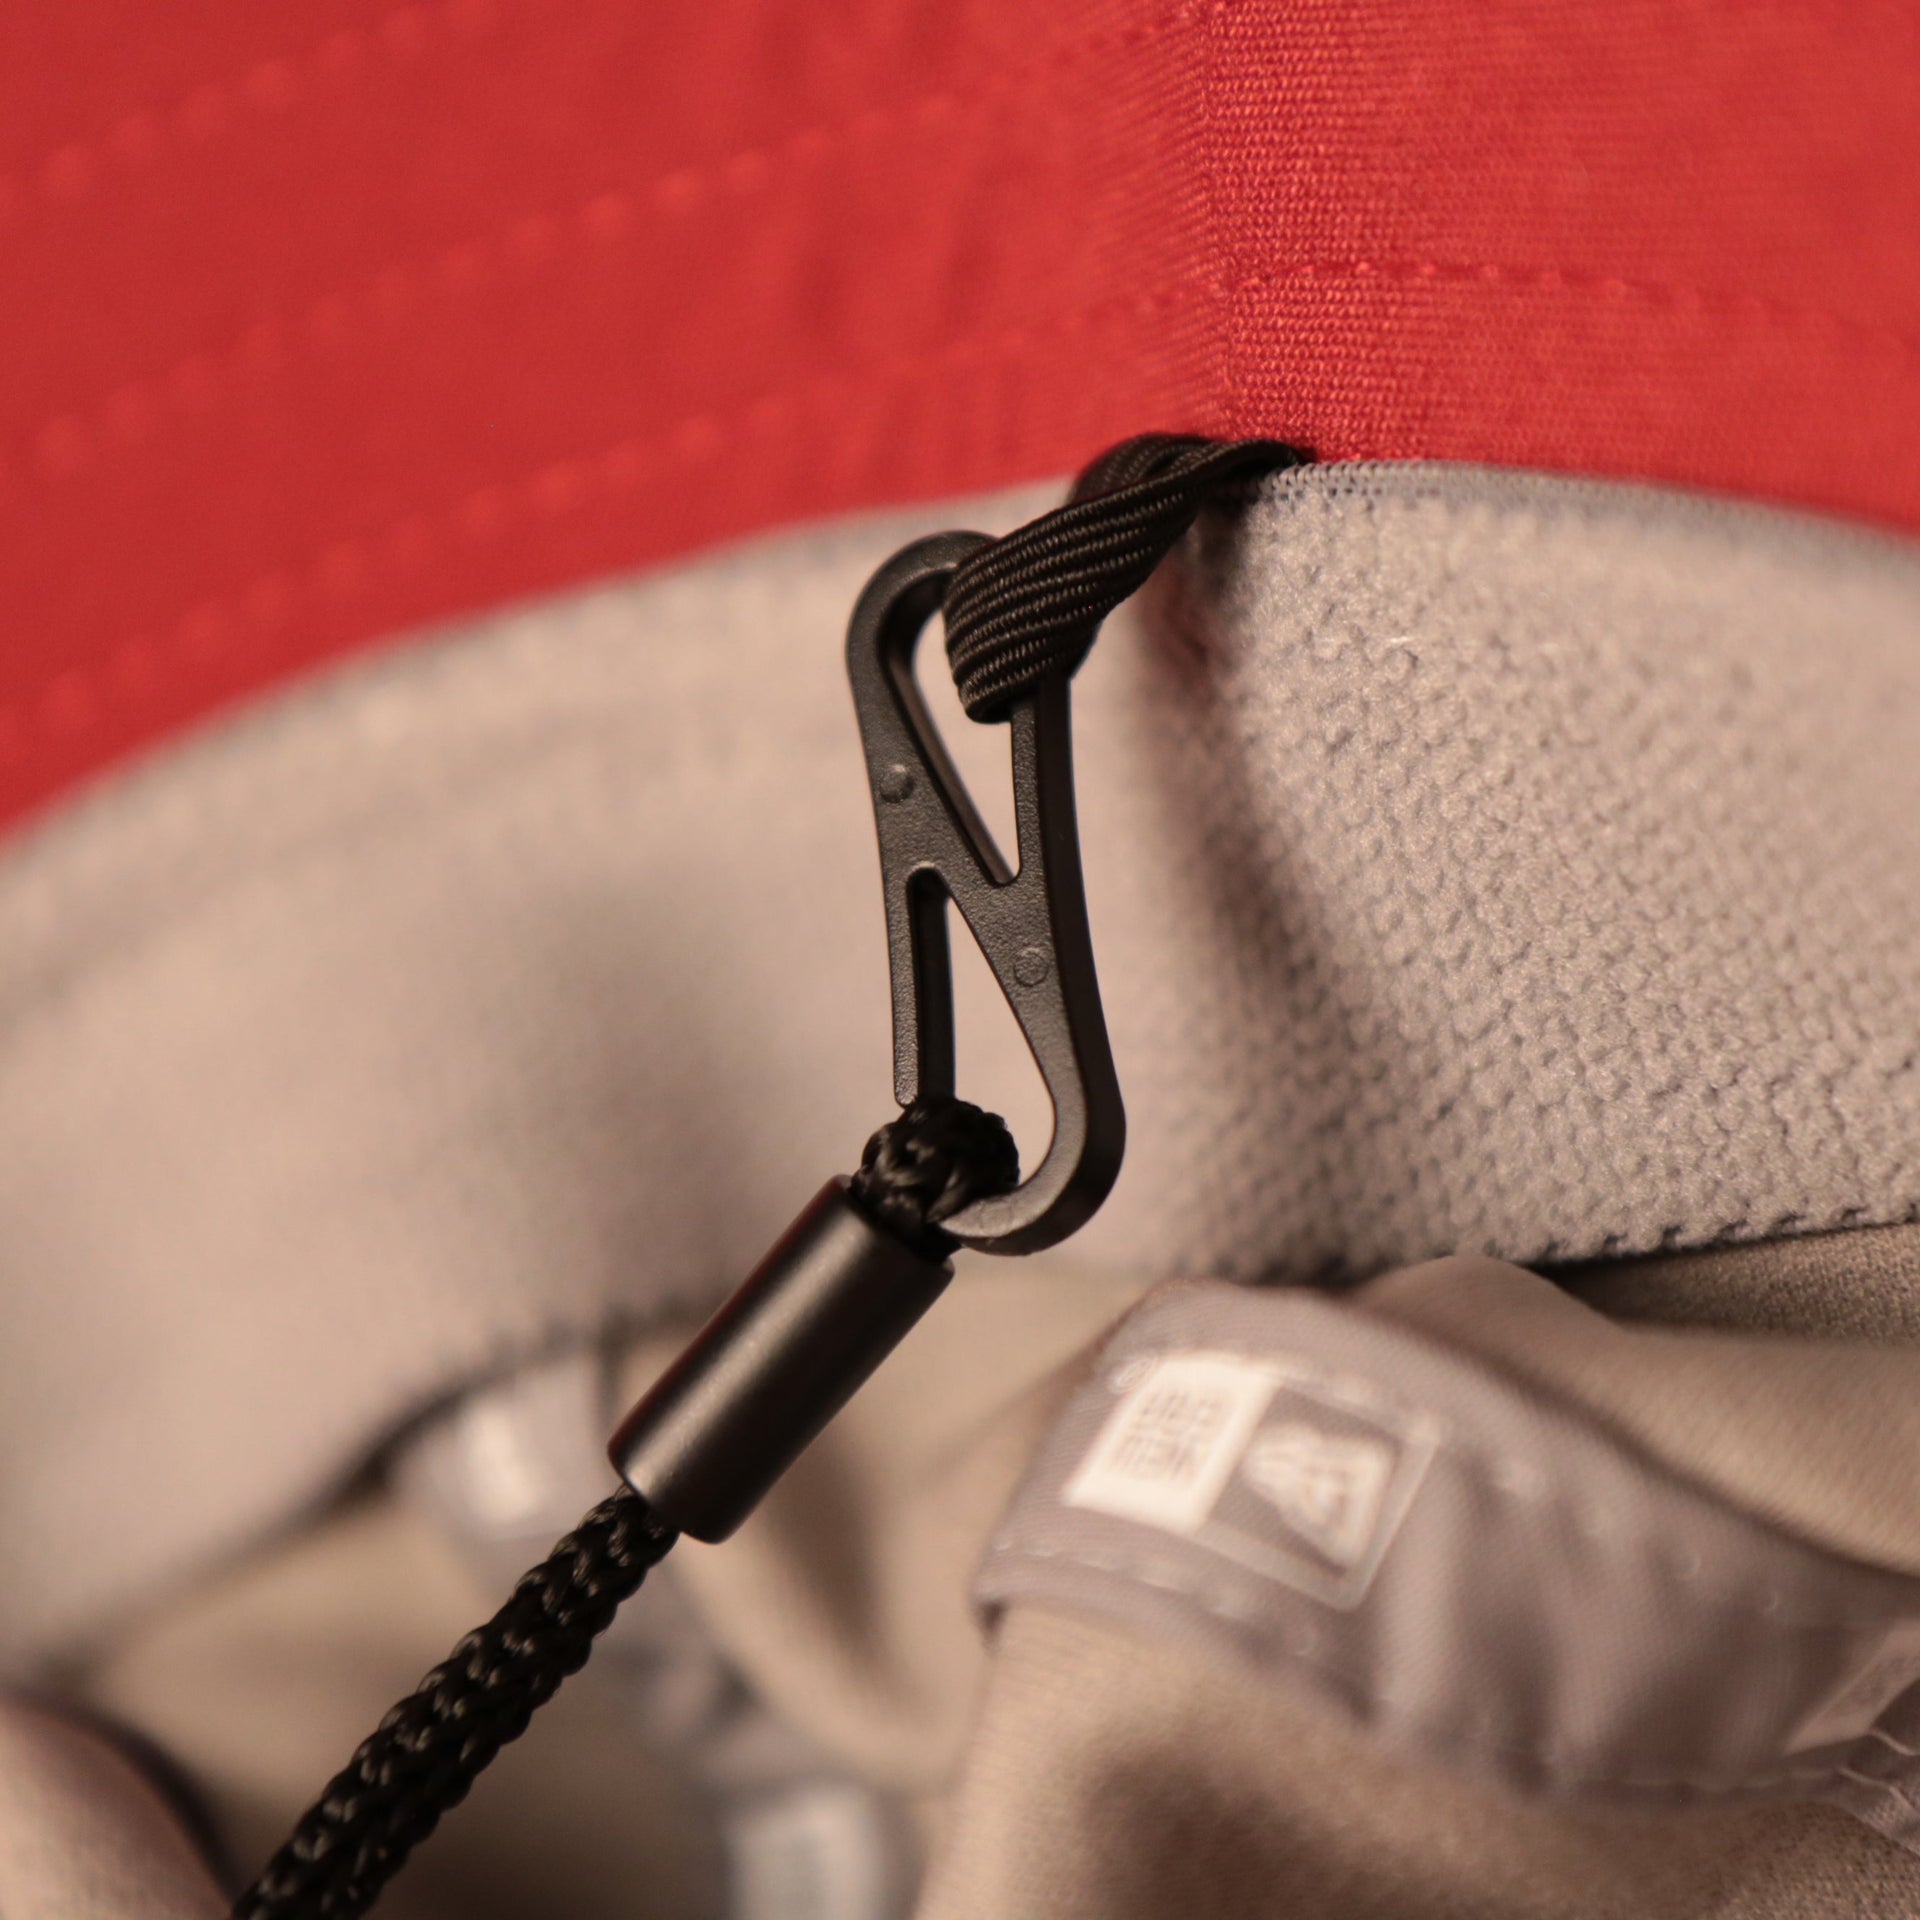 A closeup shot of the adjustable strings of the gray nfl training arizonal cardinal bucket hats by New Era.